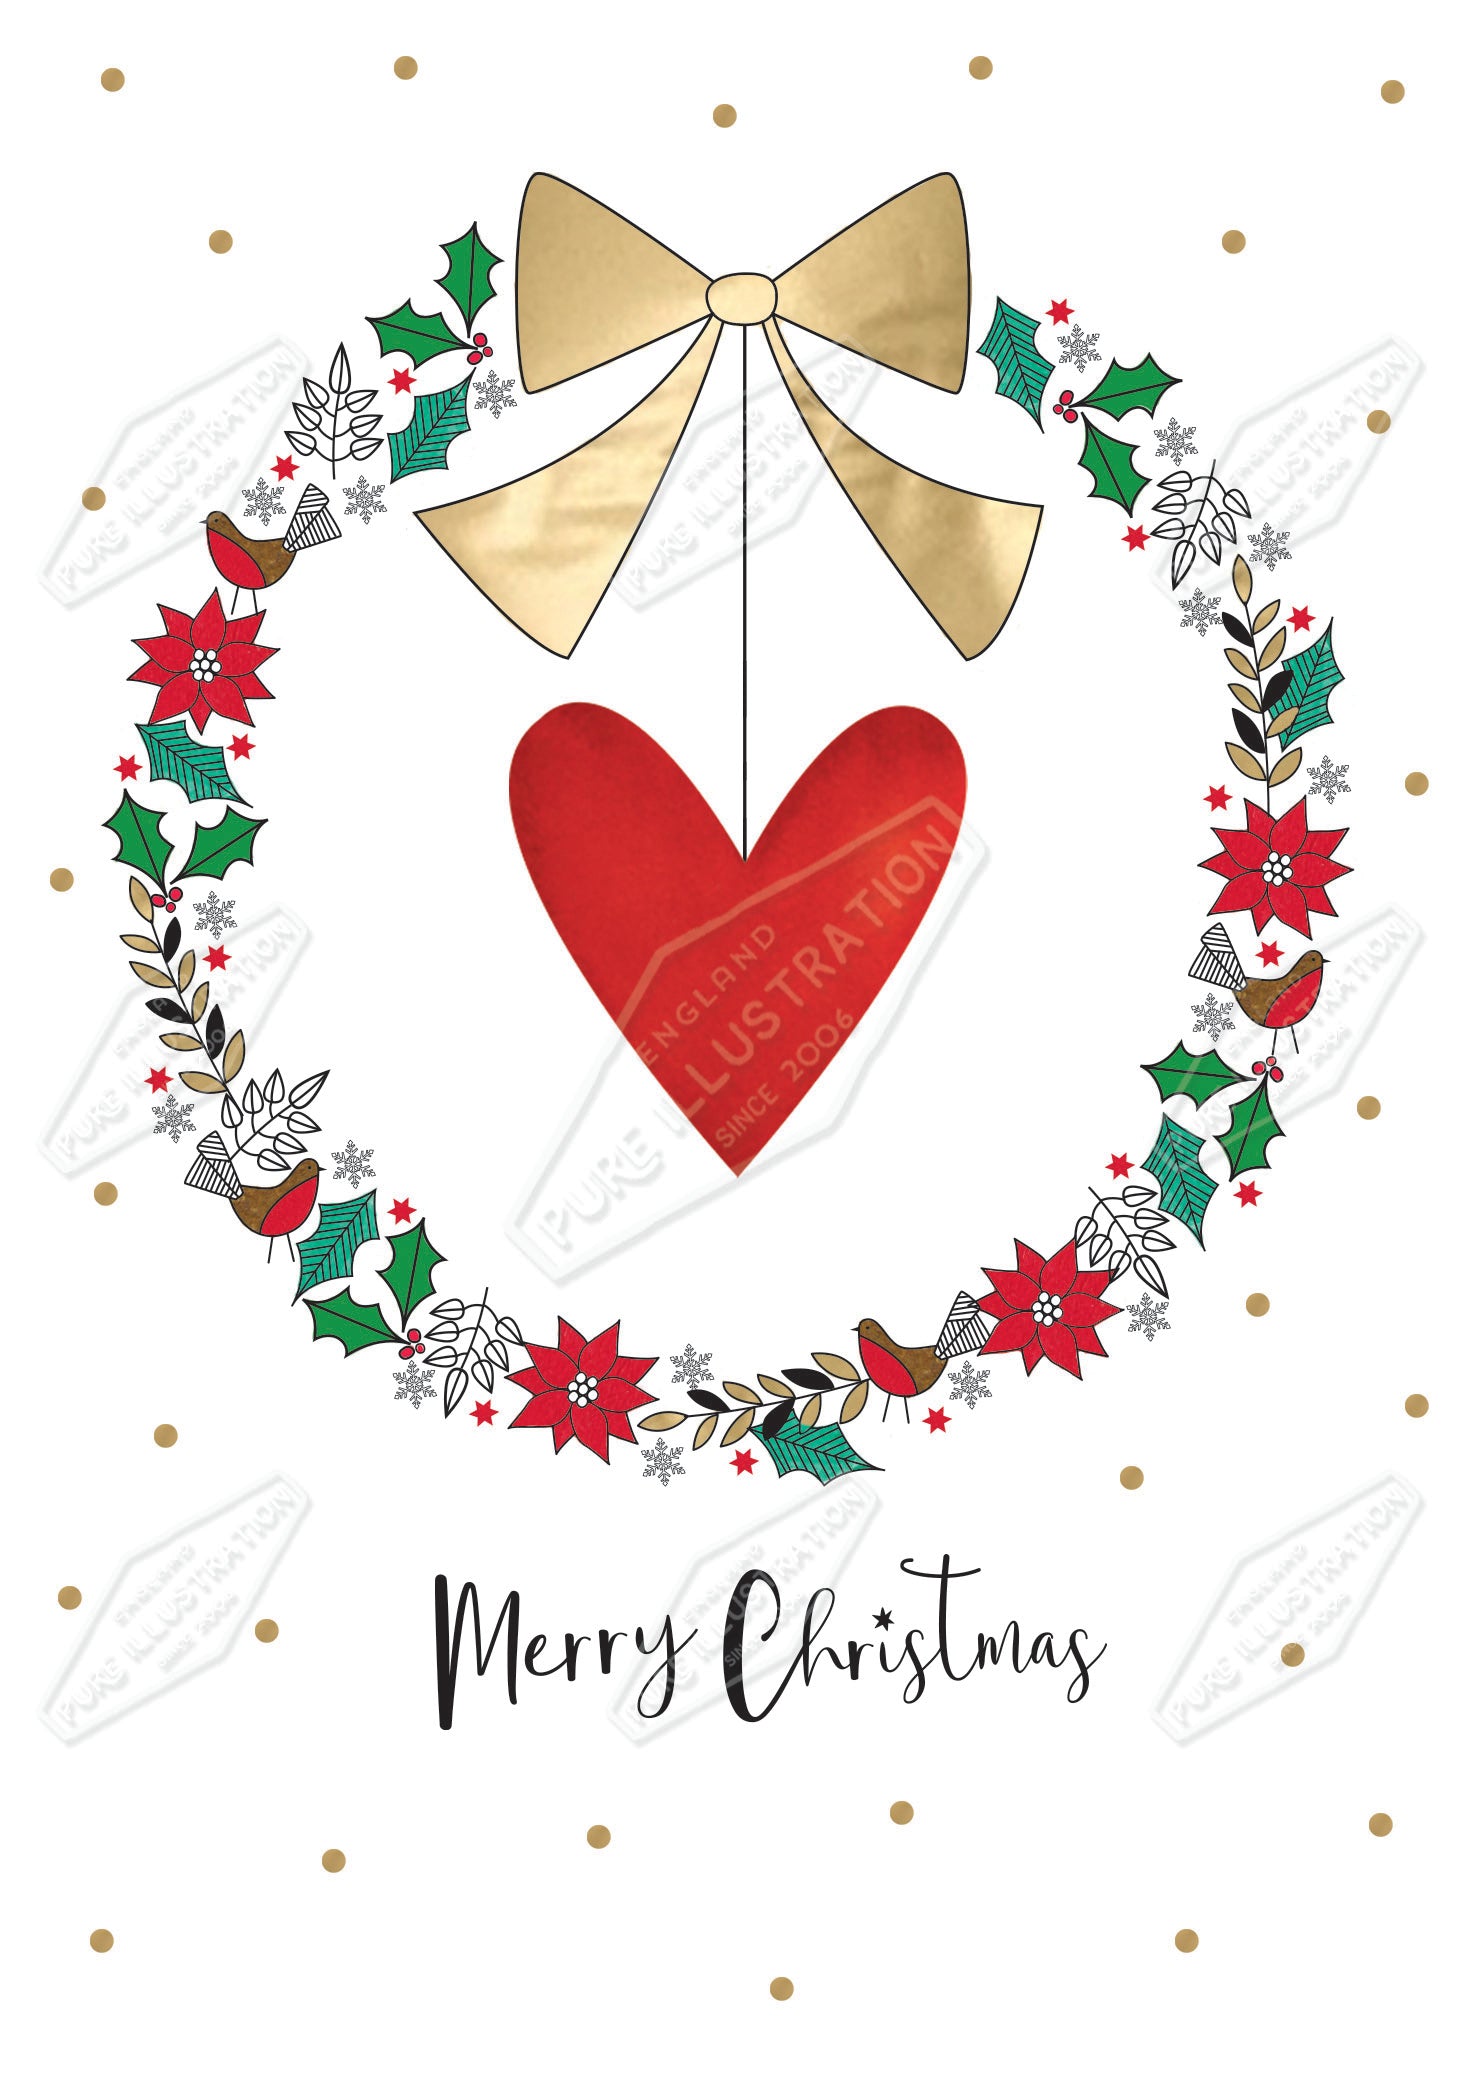 00035433IMC- Isla McDonald is represented by Pure Art Licensing Agency - Christmas Greeting Card Design